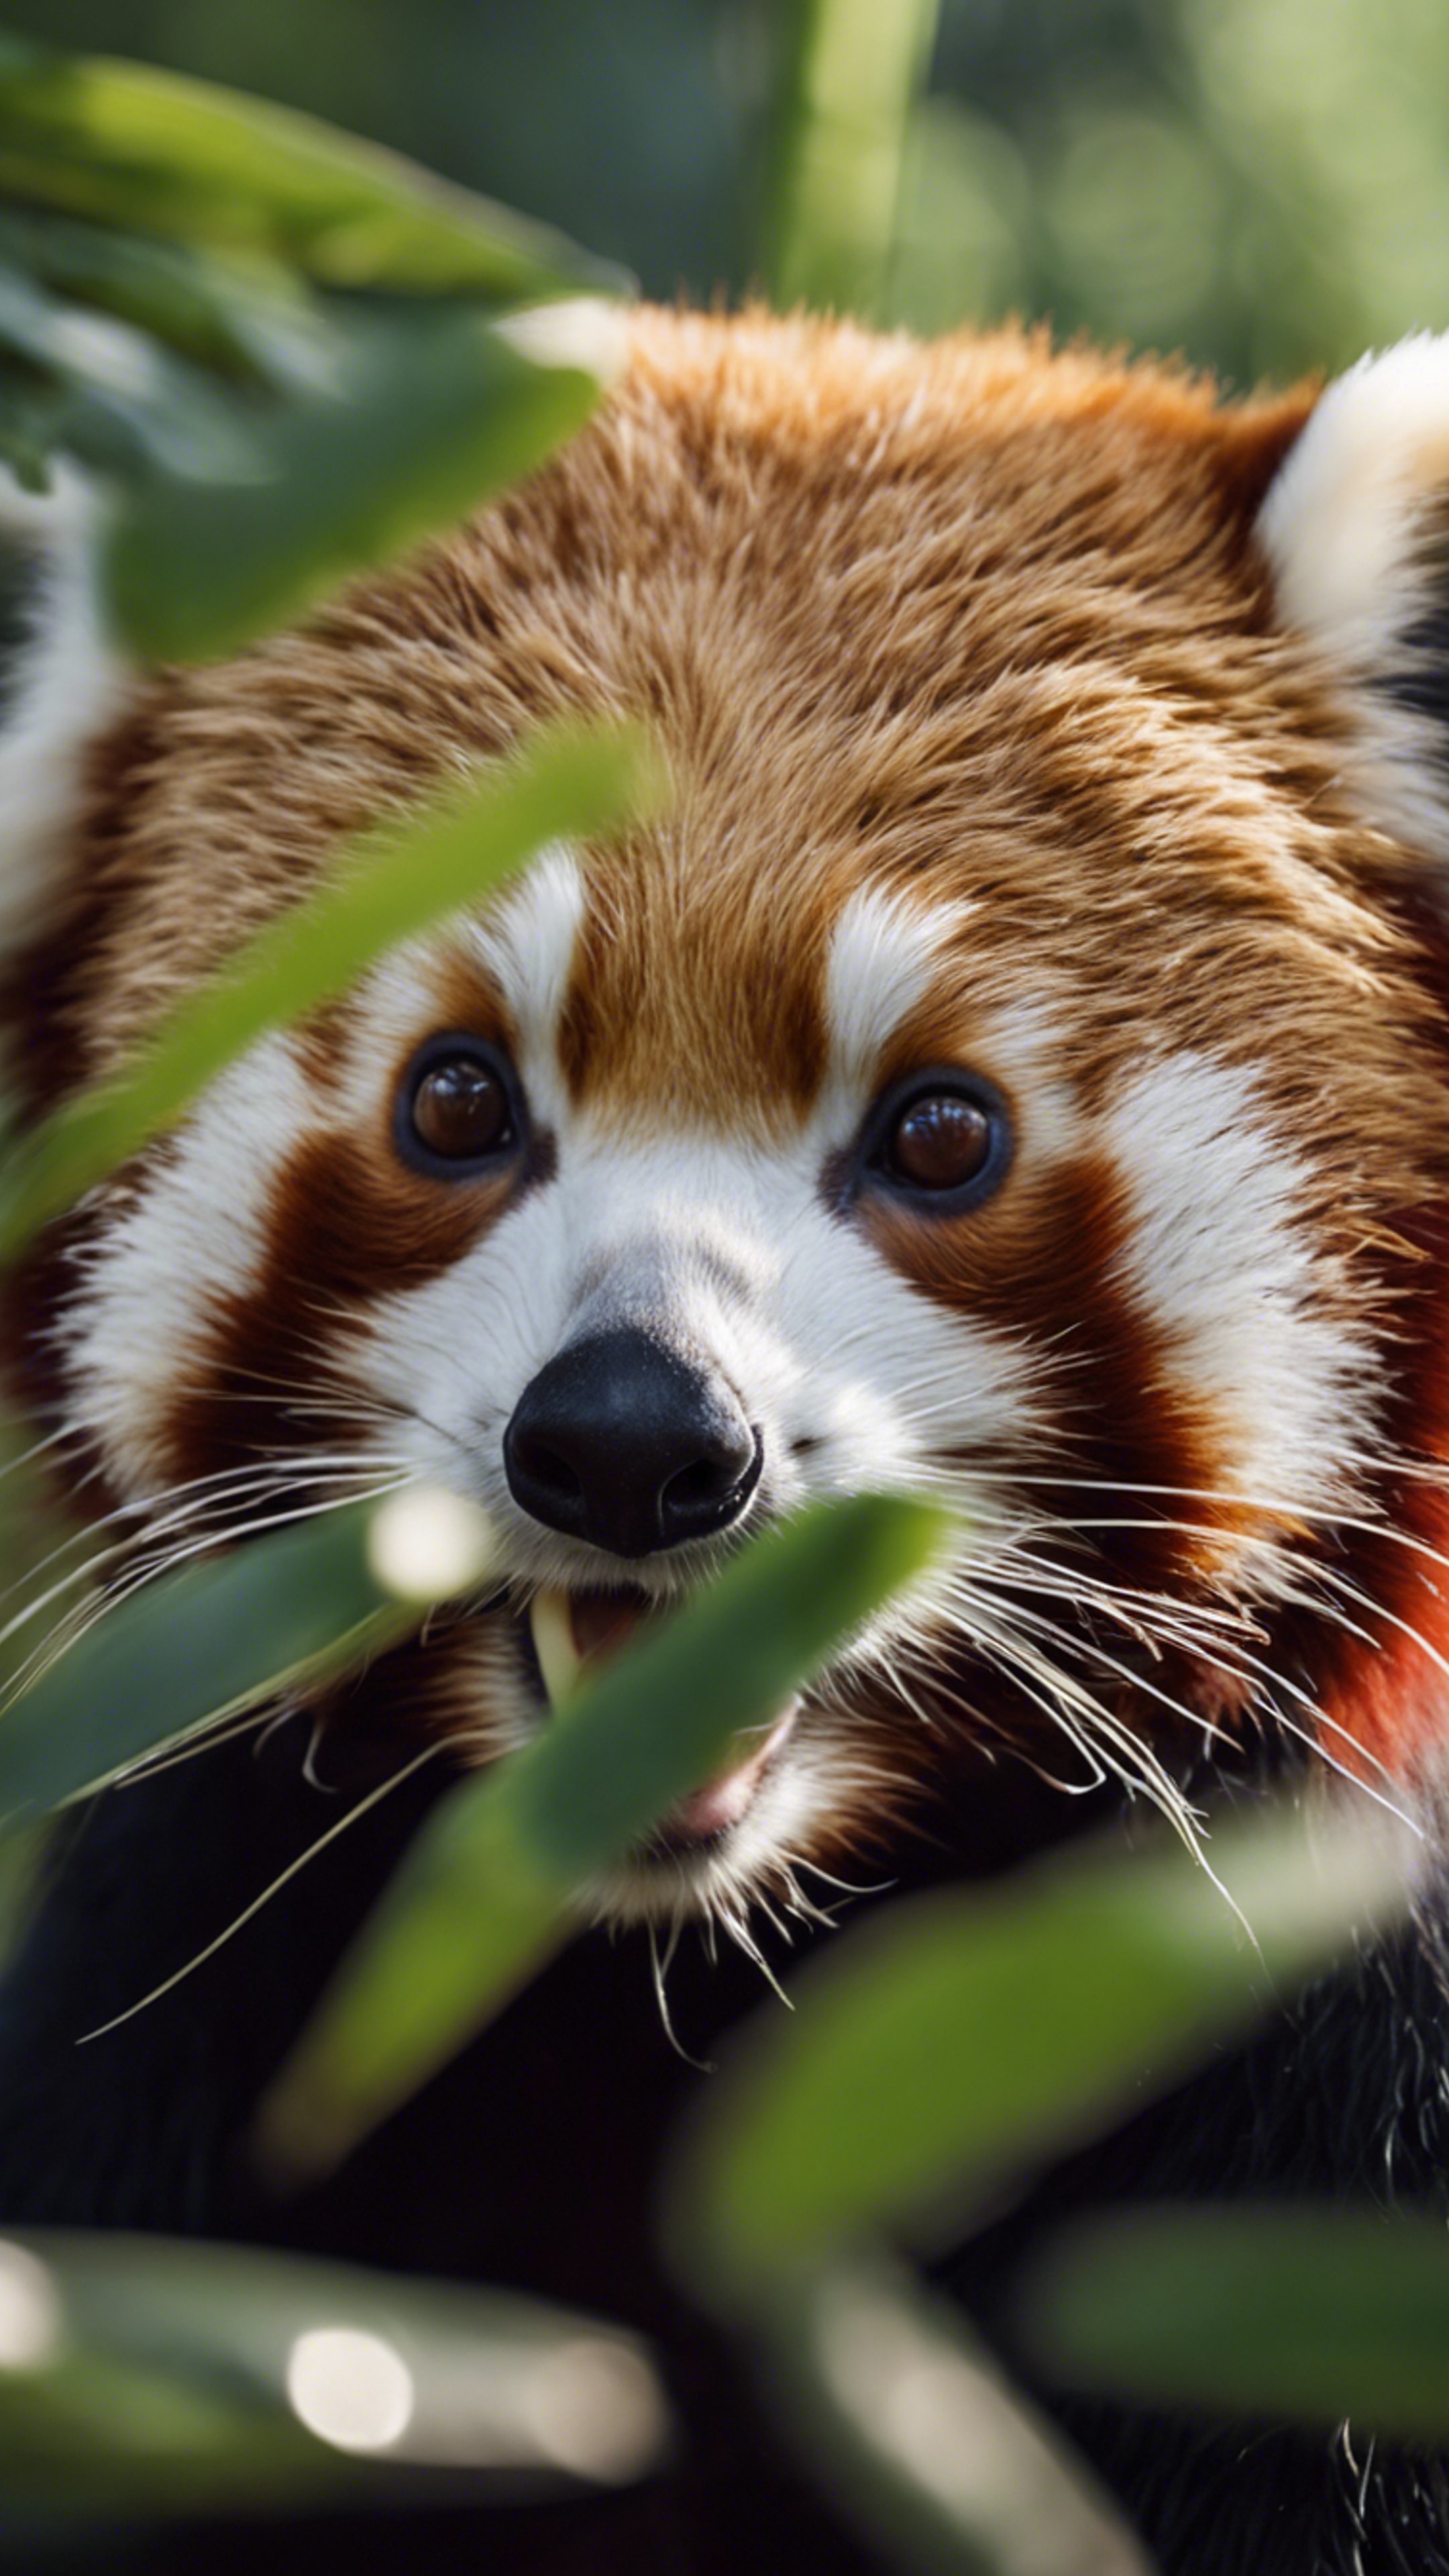 A close-up of a red panda munching on bamboo leaves 墙纸[20c4a1c4fccc4fa88325]